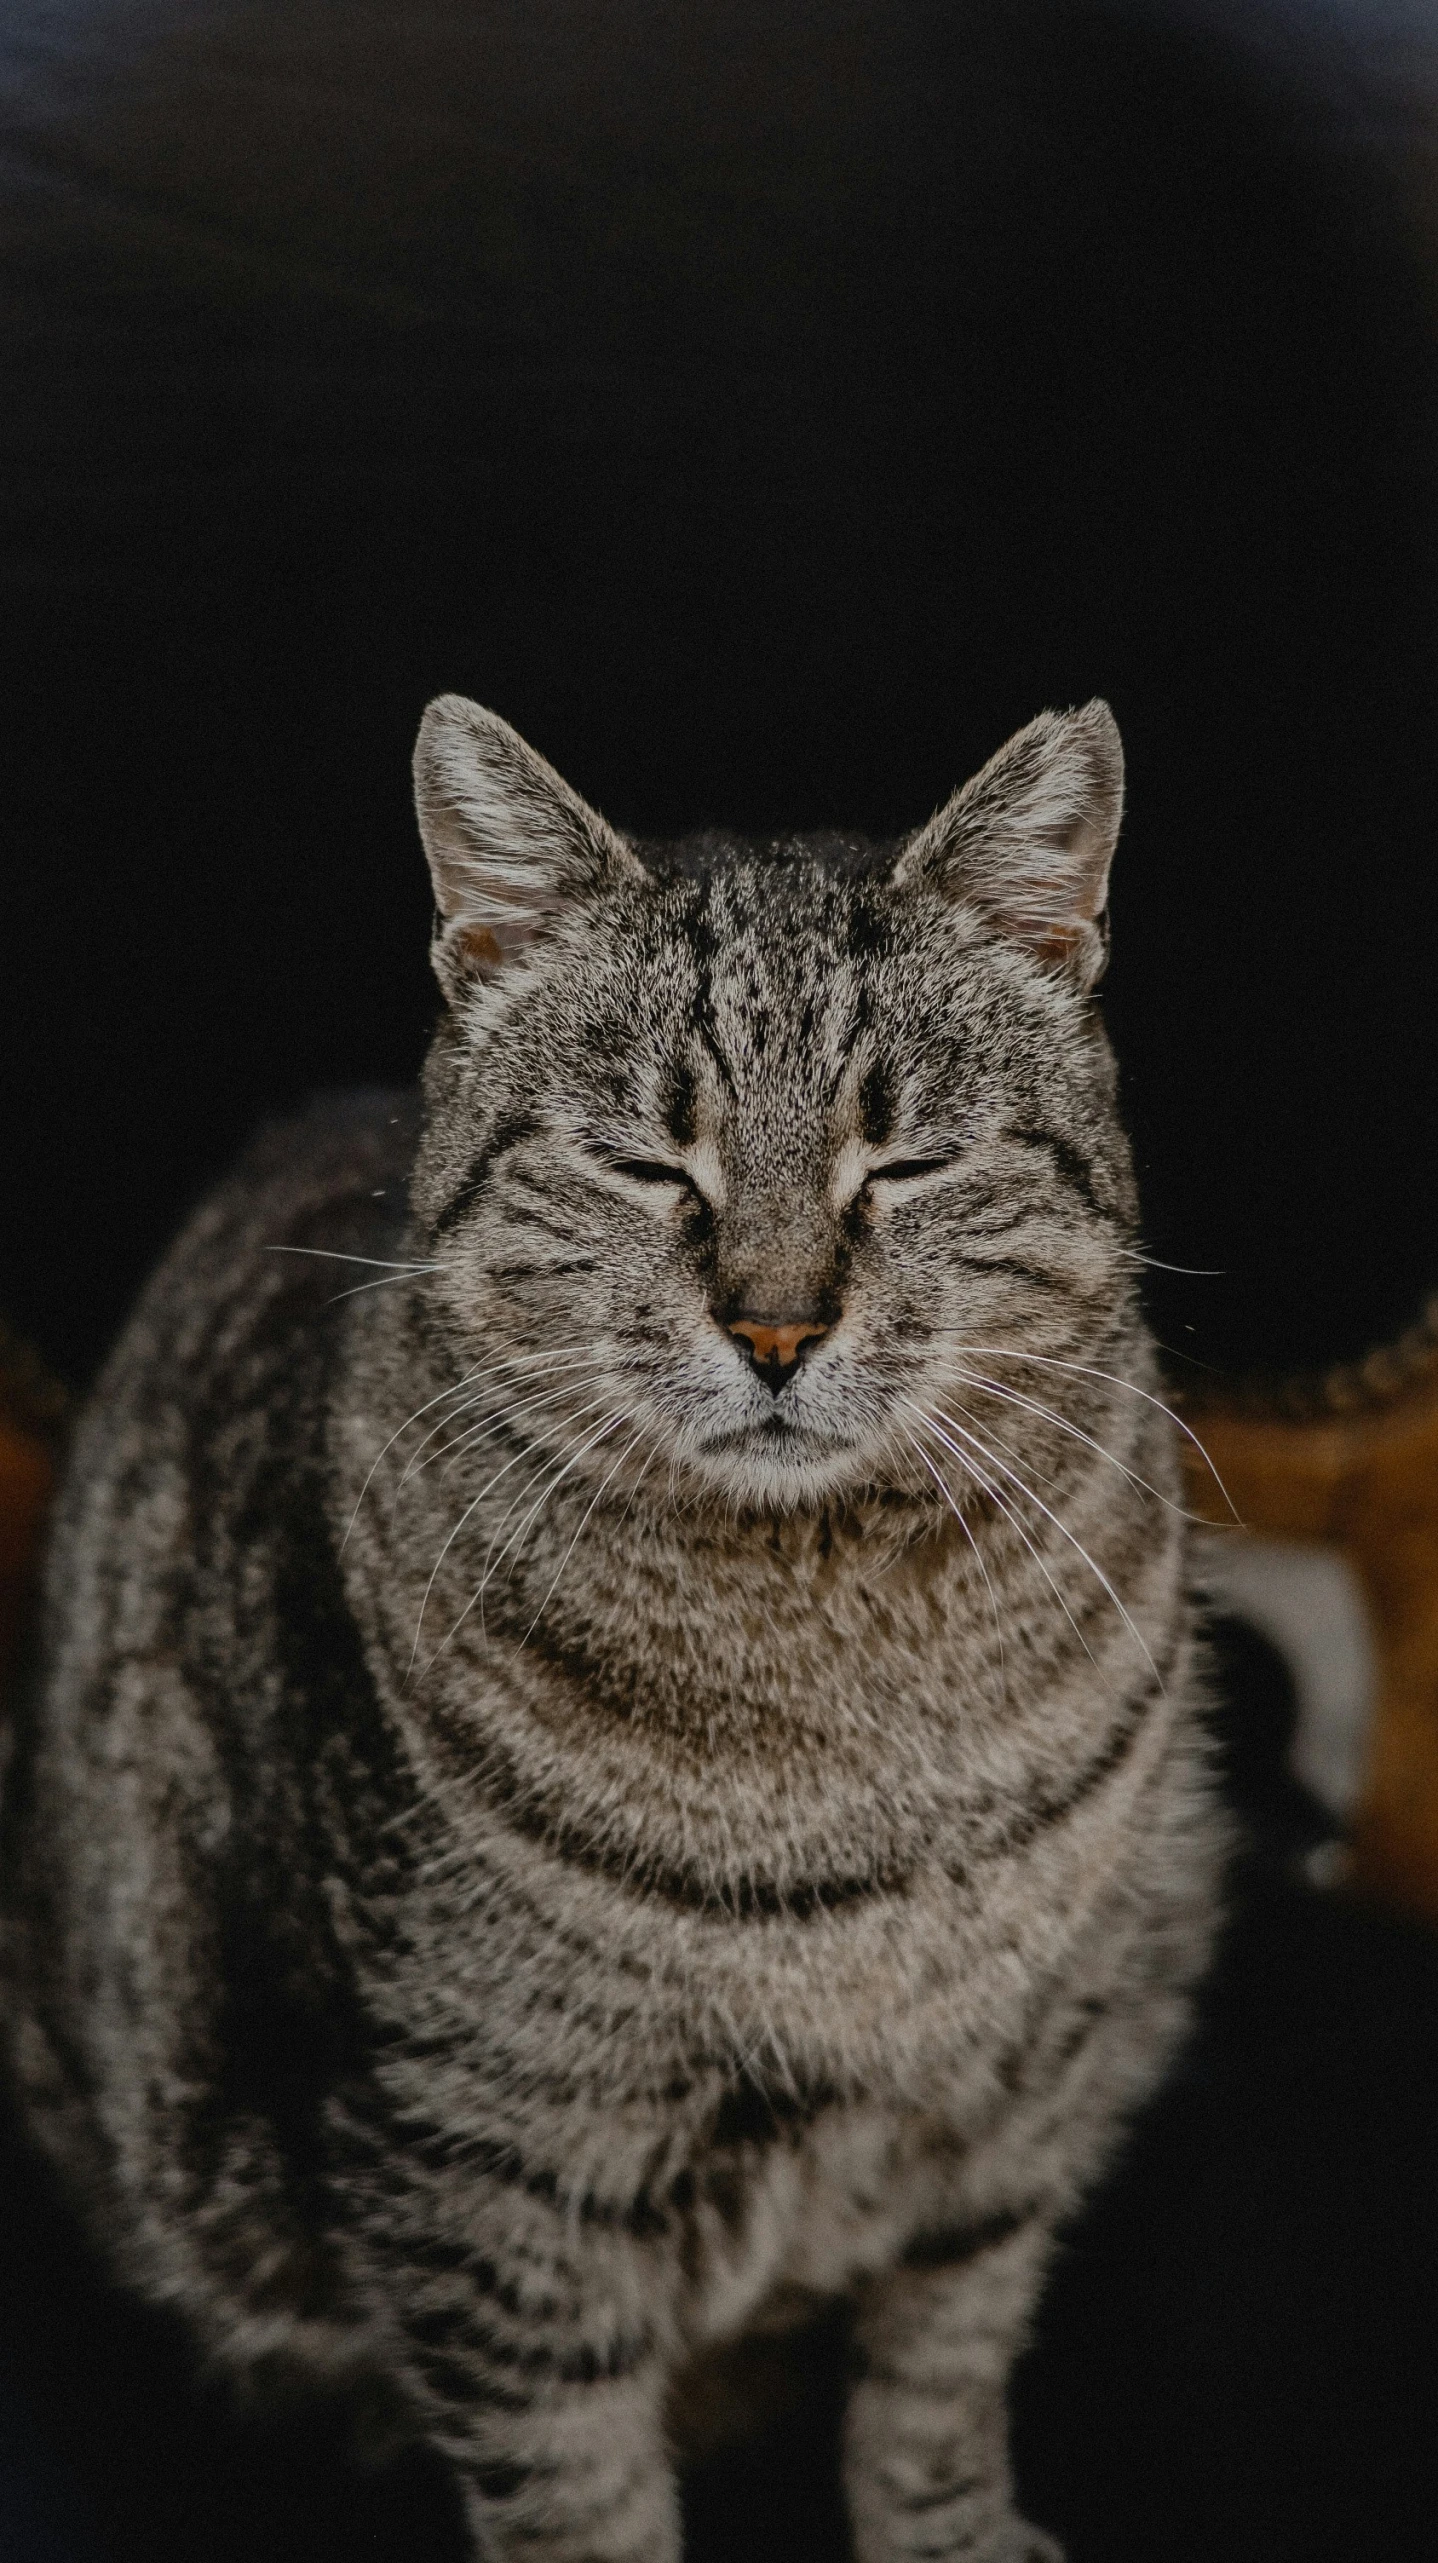 a close up image of a cat with its eyes closed